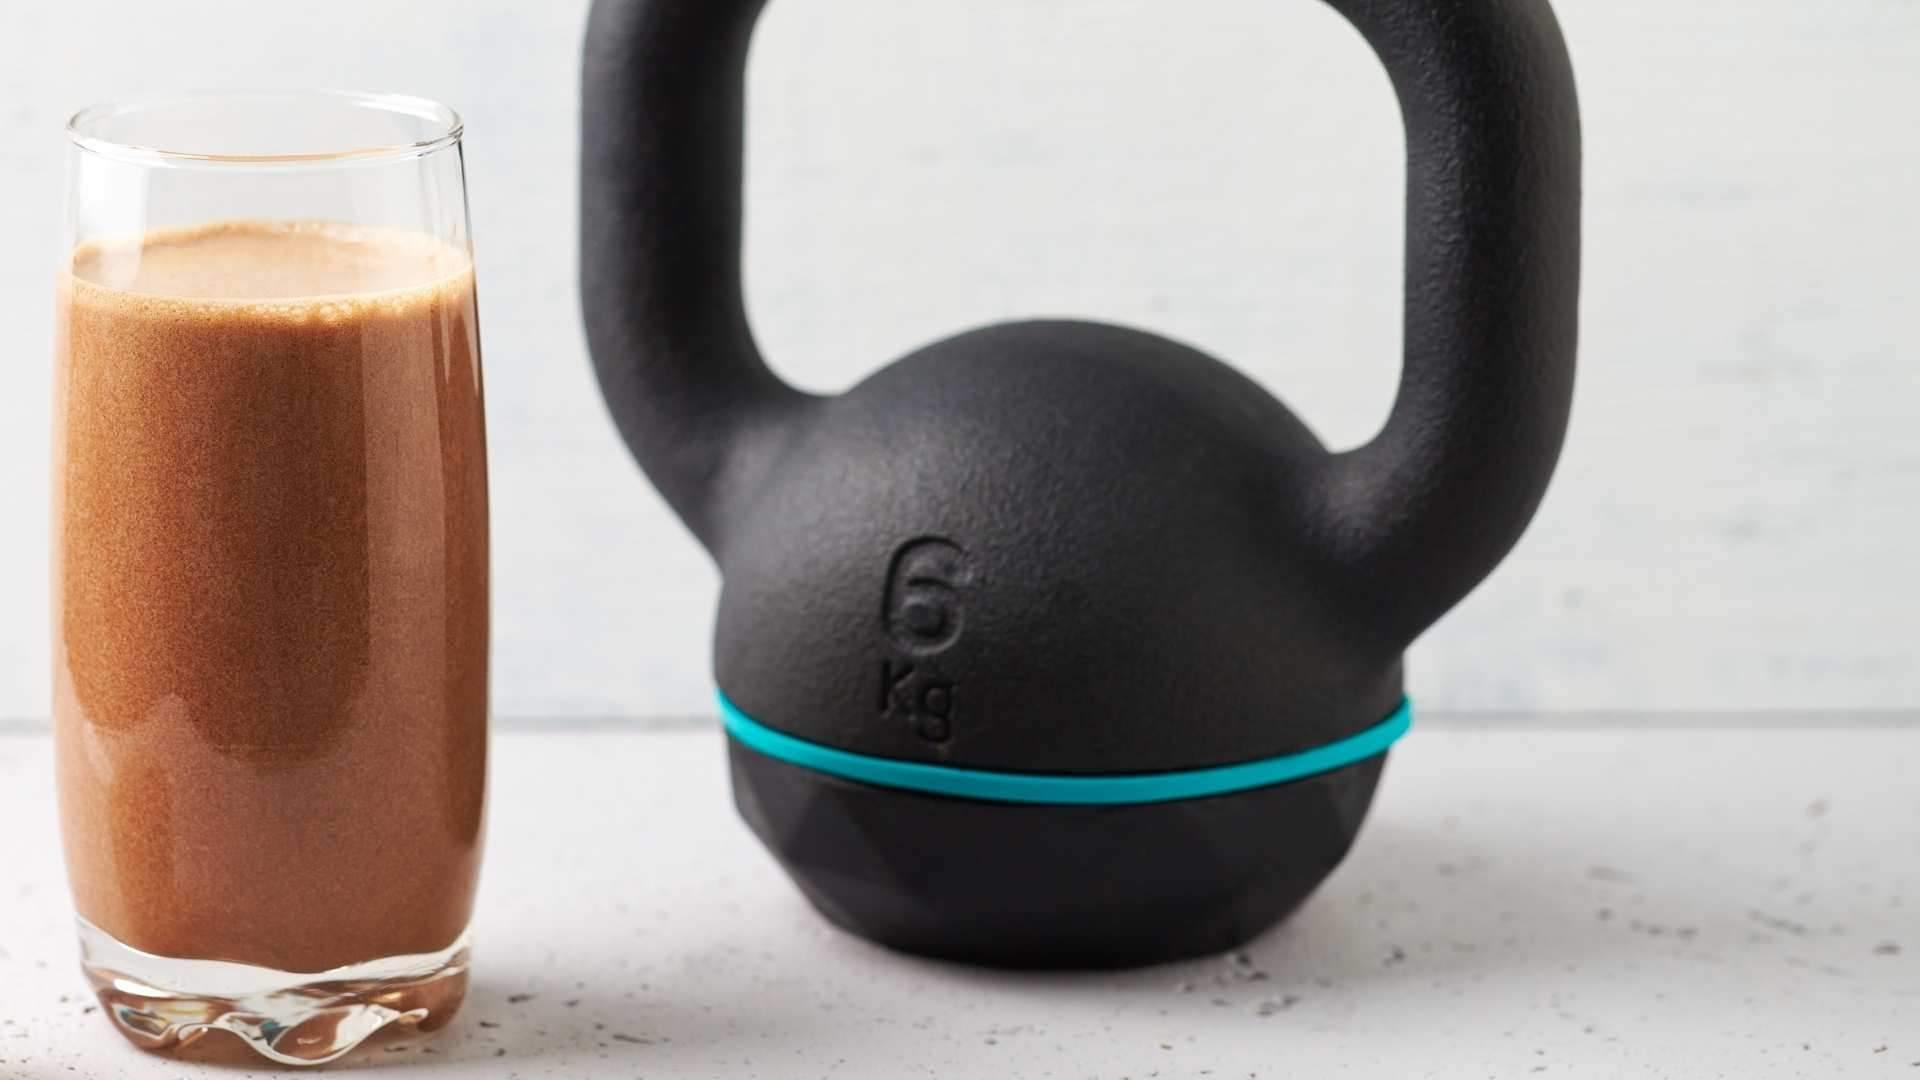 A delicious Plant Protein smoothie next to a kettle bell  